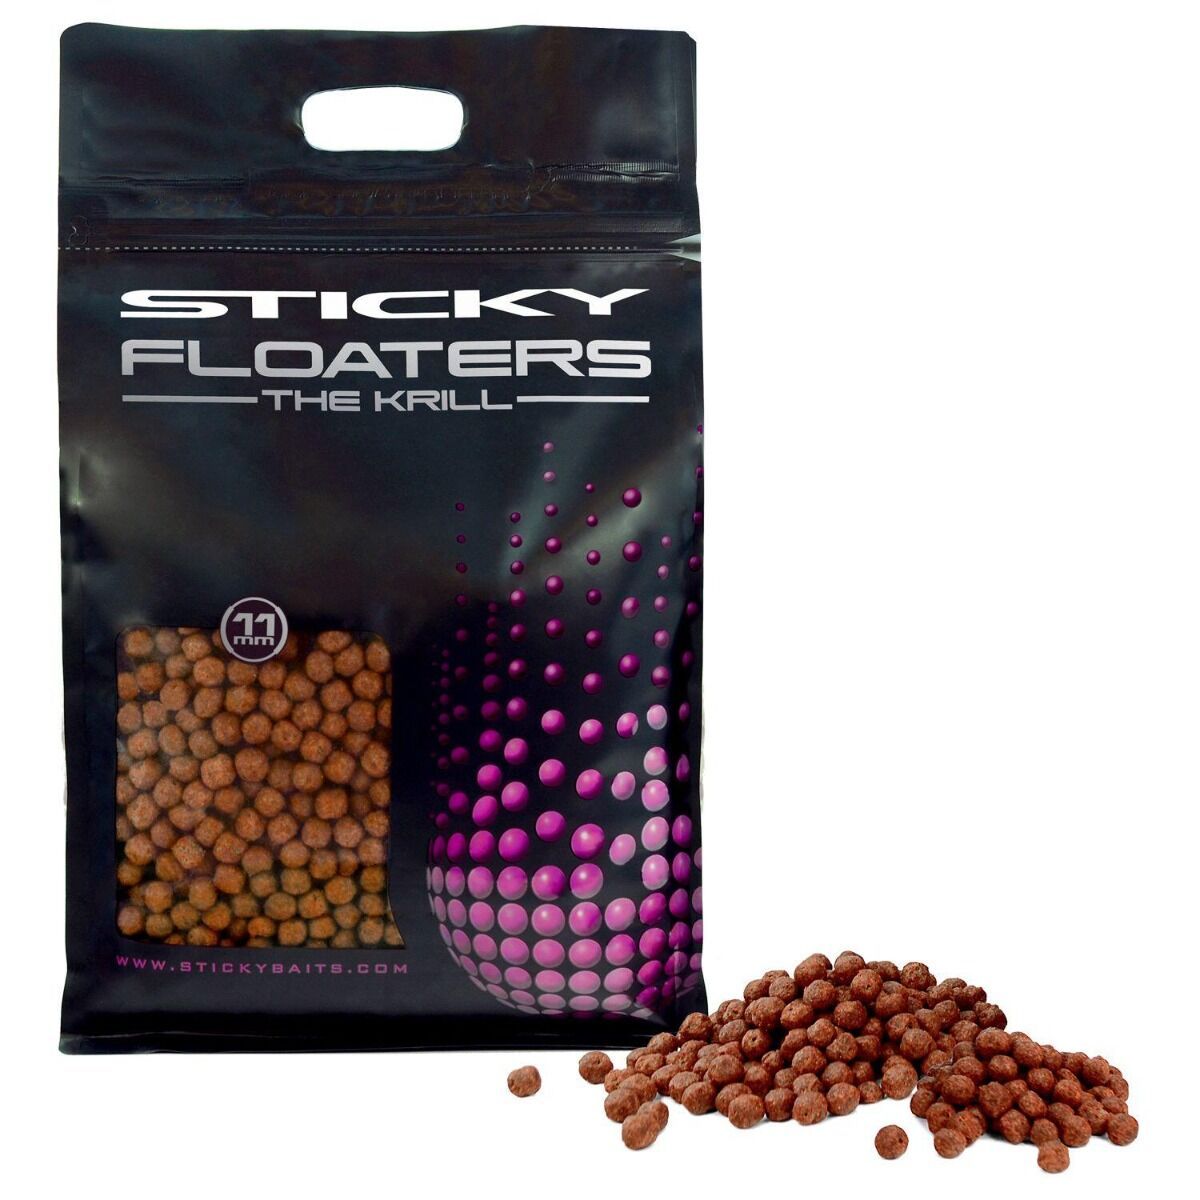 Sticky Baits The Krill Floaters Range 3kg Floating Pellets Baits *6mm & 11mm* 